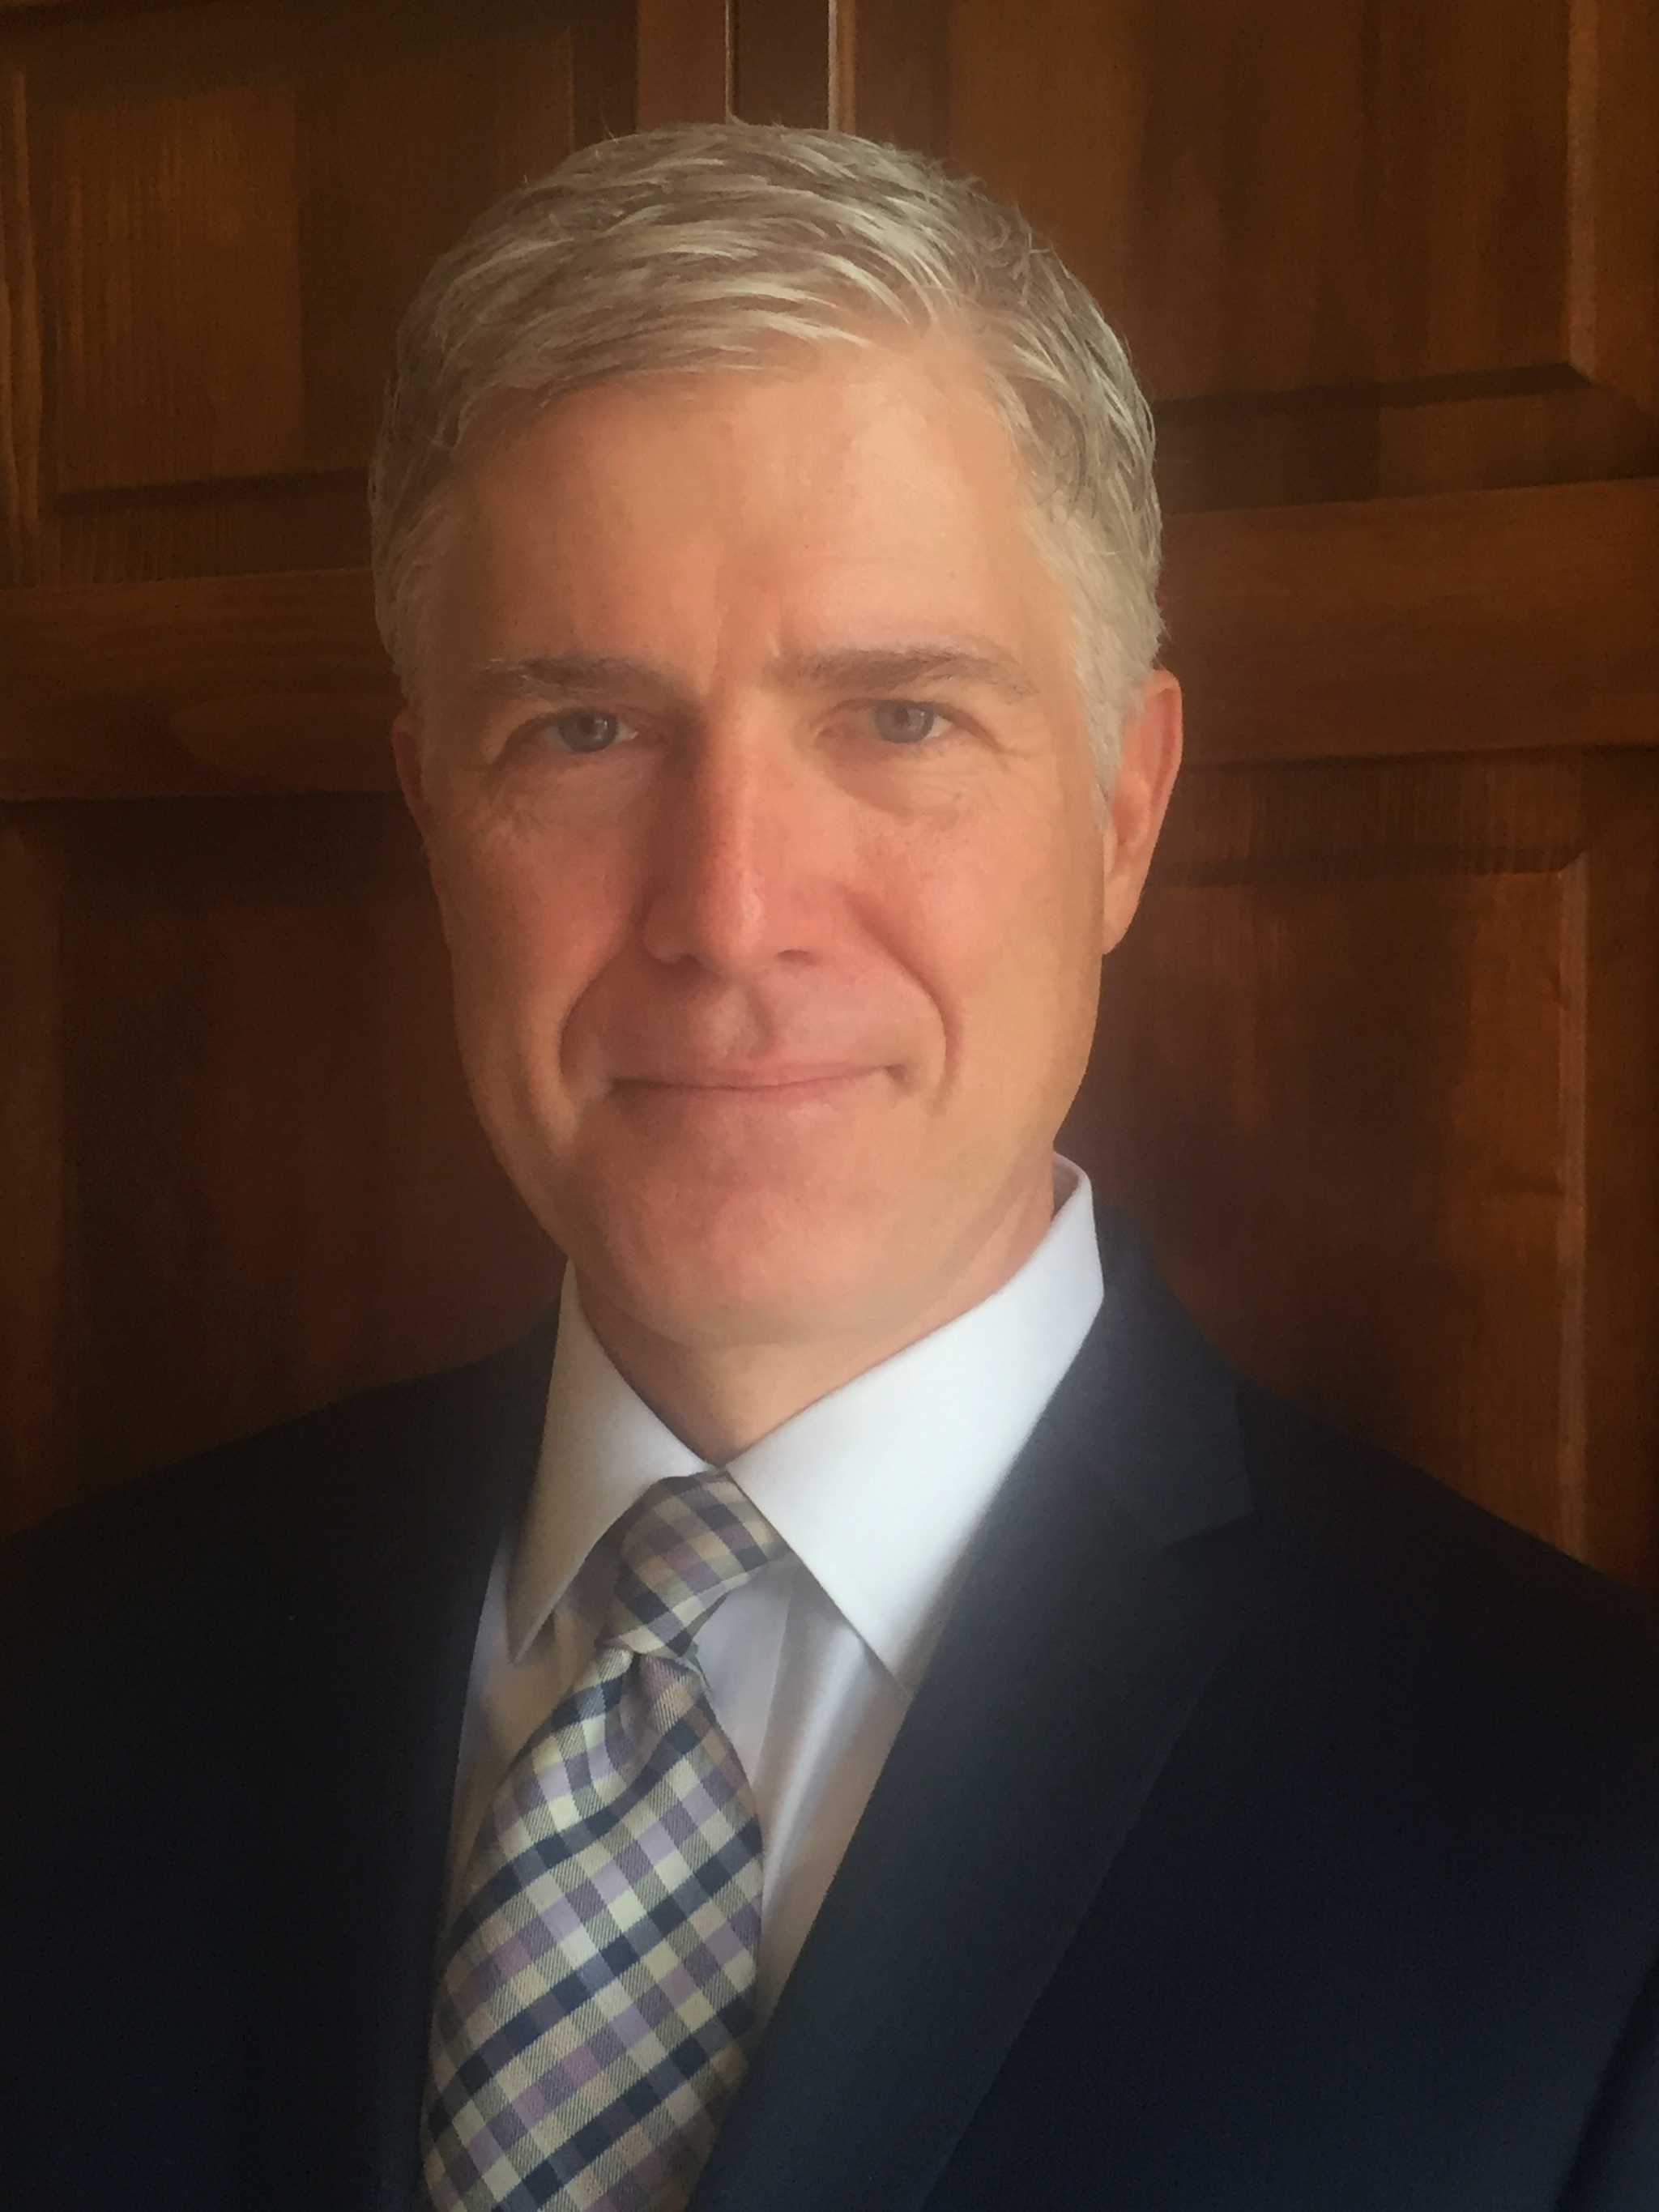 This photo provided by the 10th U.S. Circuit Court of Appeals shows Judge Neil Gorsuch. Conservatives who care about the court say they have no such worry this time around. They feel confident that whomever President Donald Trump nominates for the Supreme Court, they won’t be looking back with regret in the years to come. (10th U.S. Circuit Court of Appeals via AP)